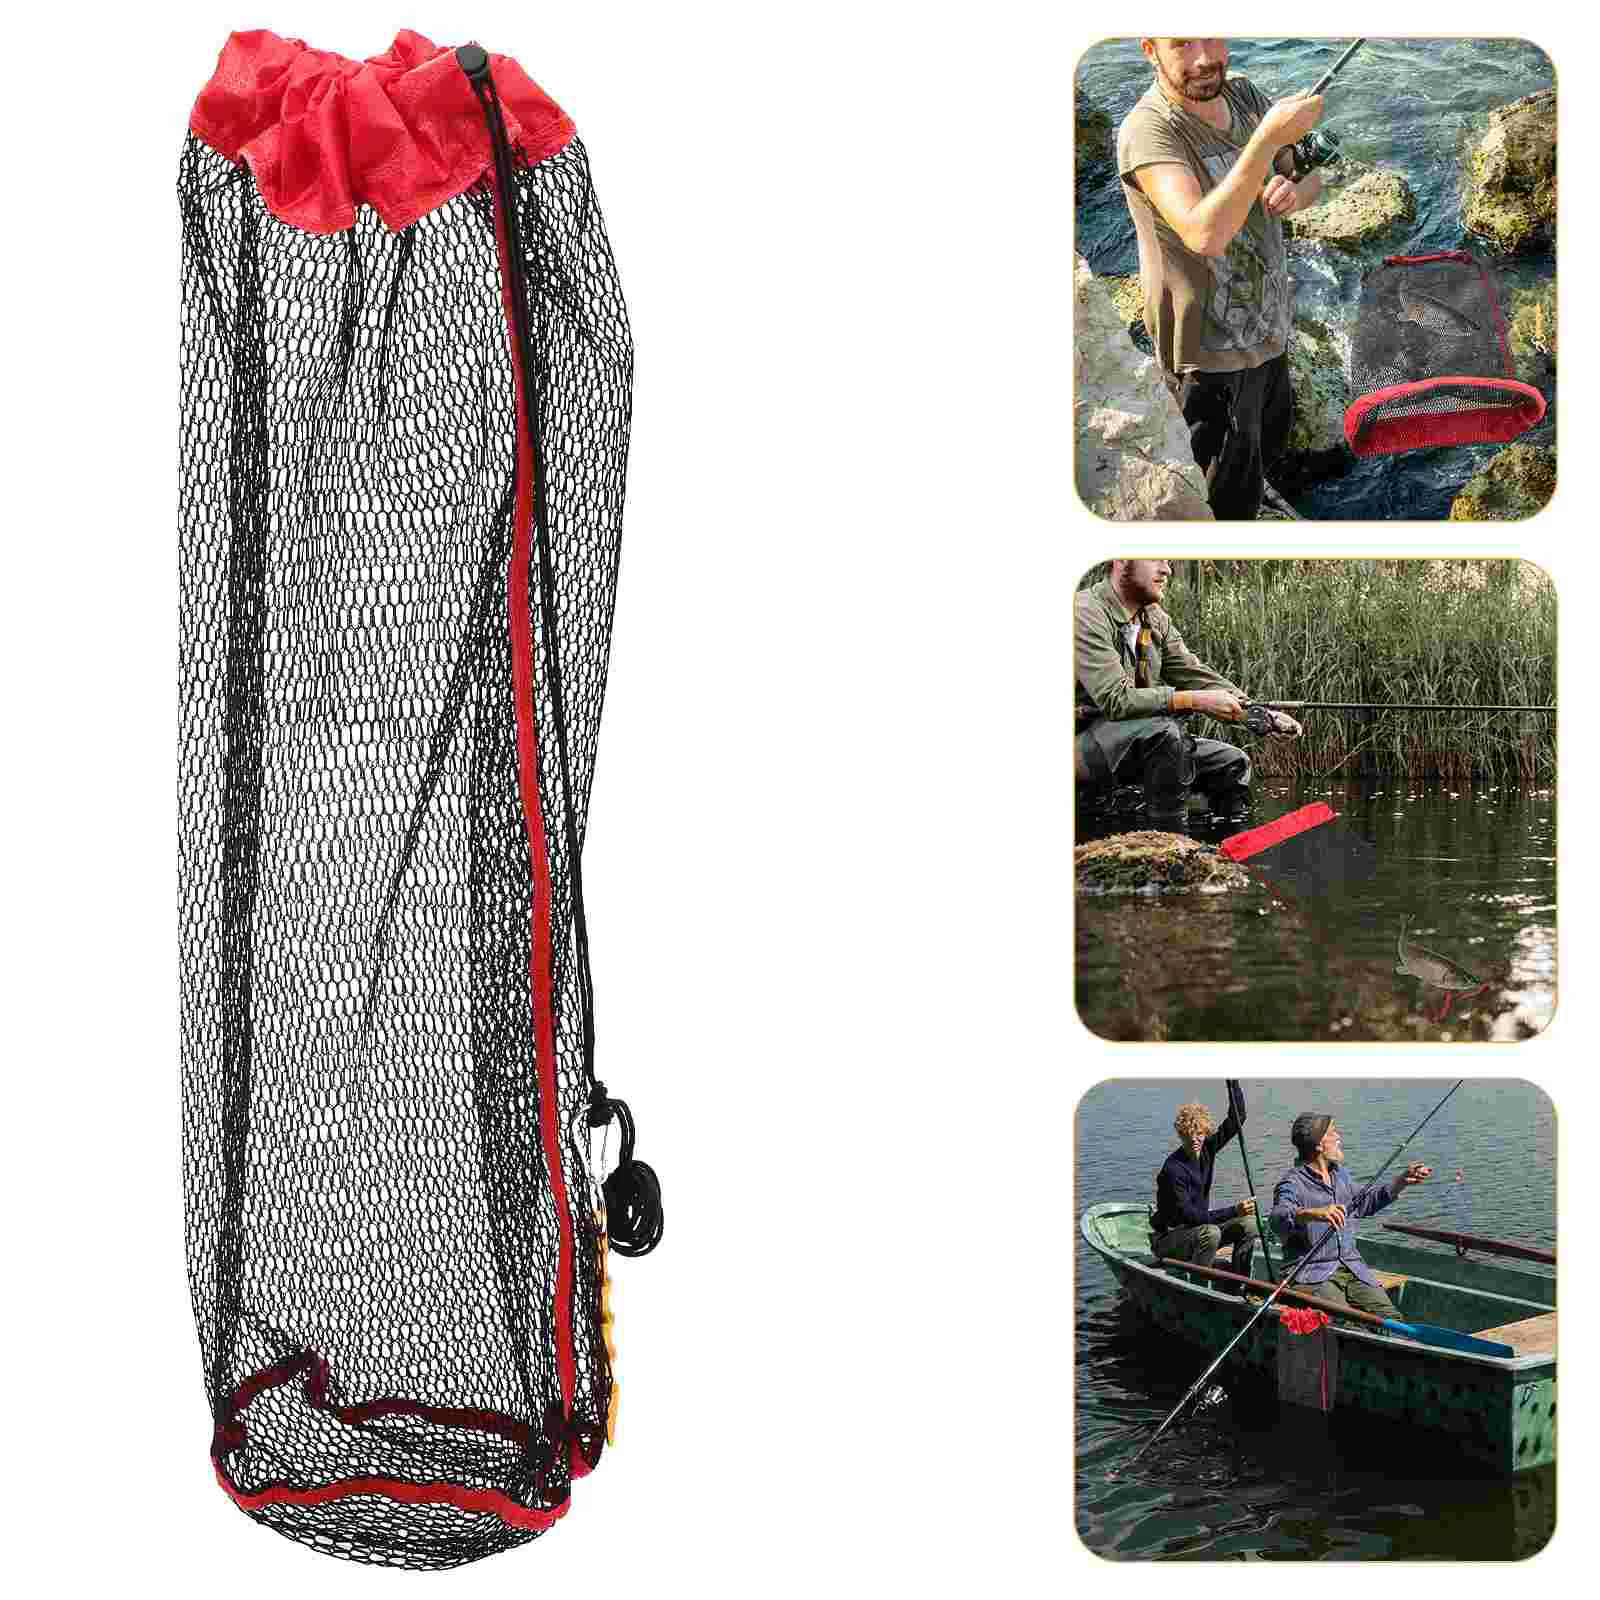 

Fishing Net Guard Netting Catch Nets Foldable Tools Locating Mesh Cage Guards Cast Folding